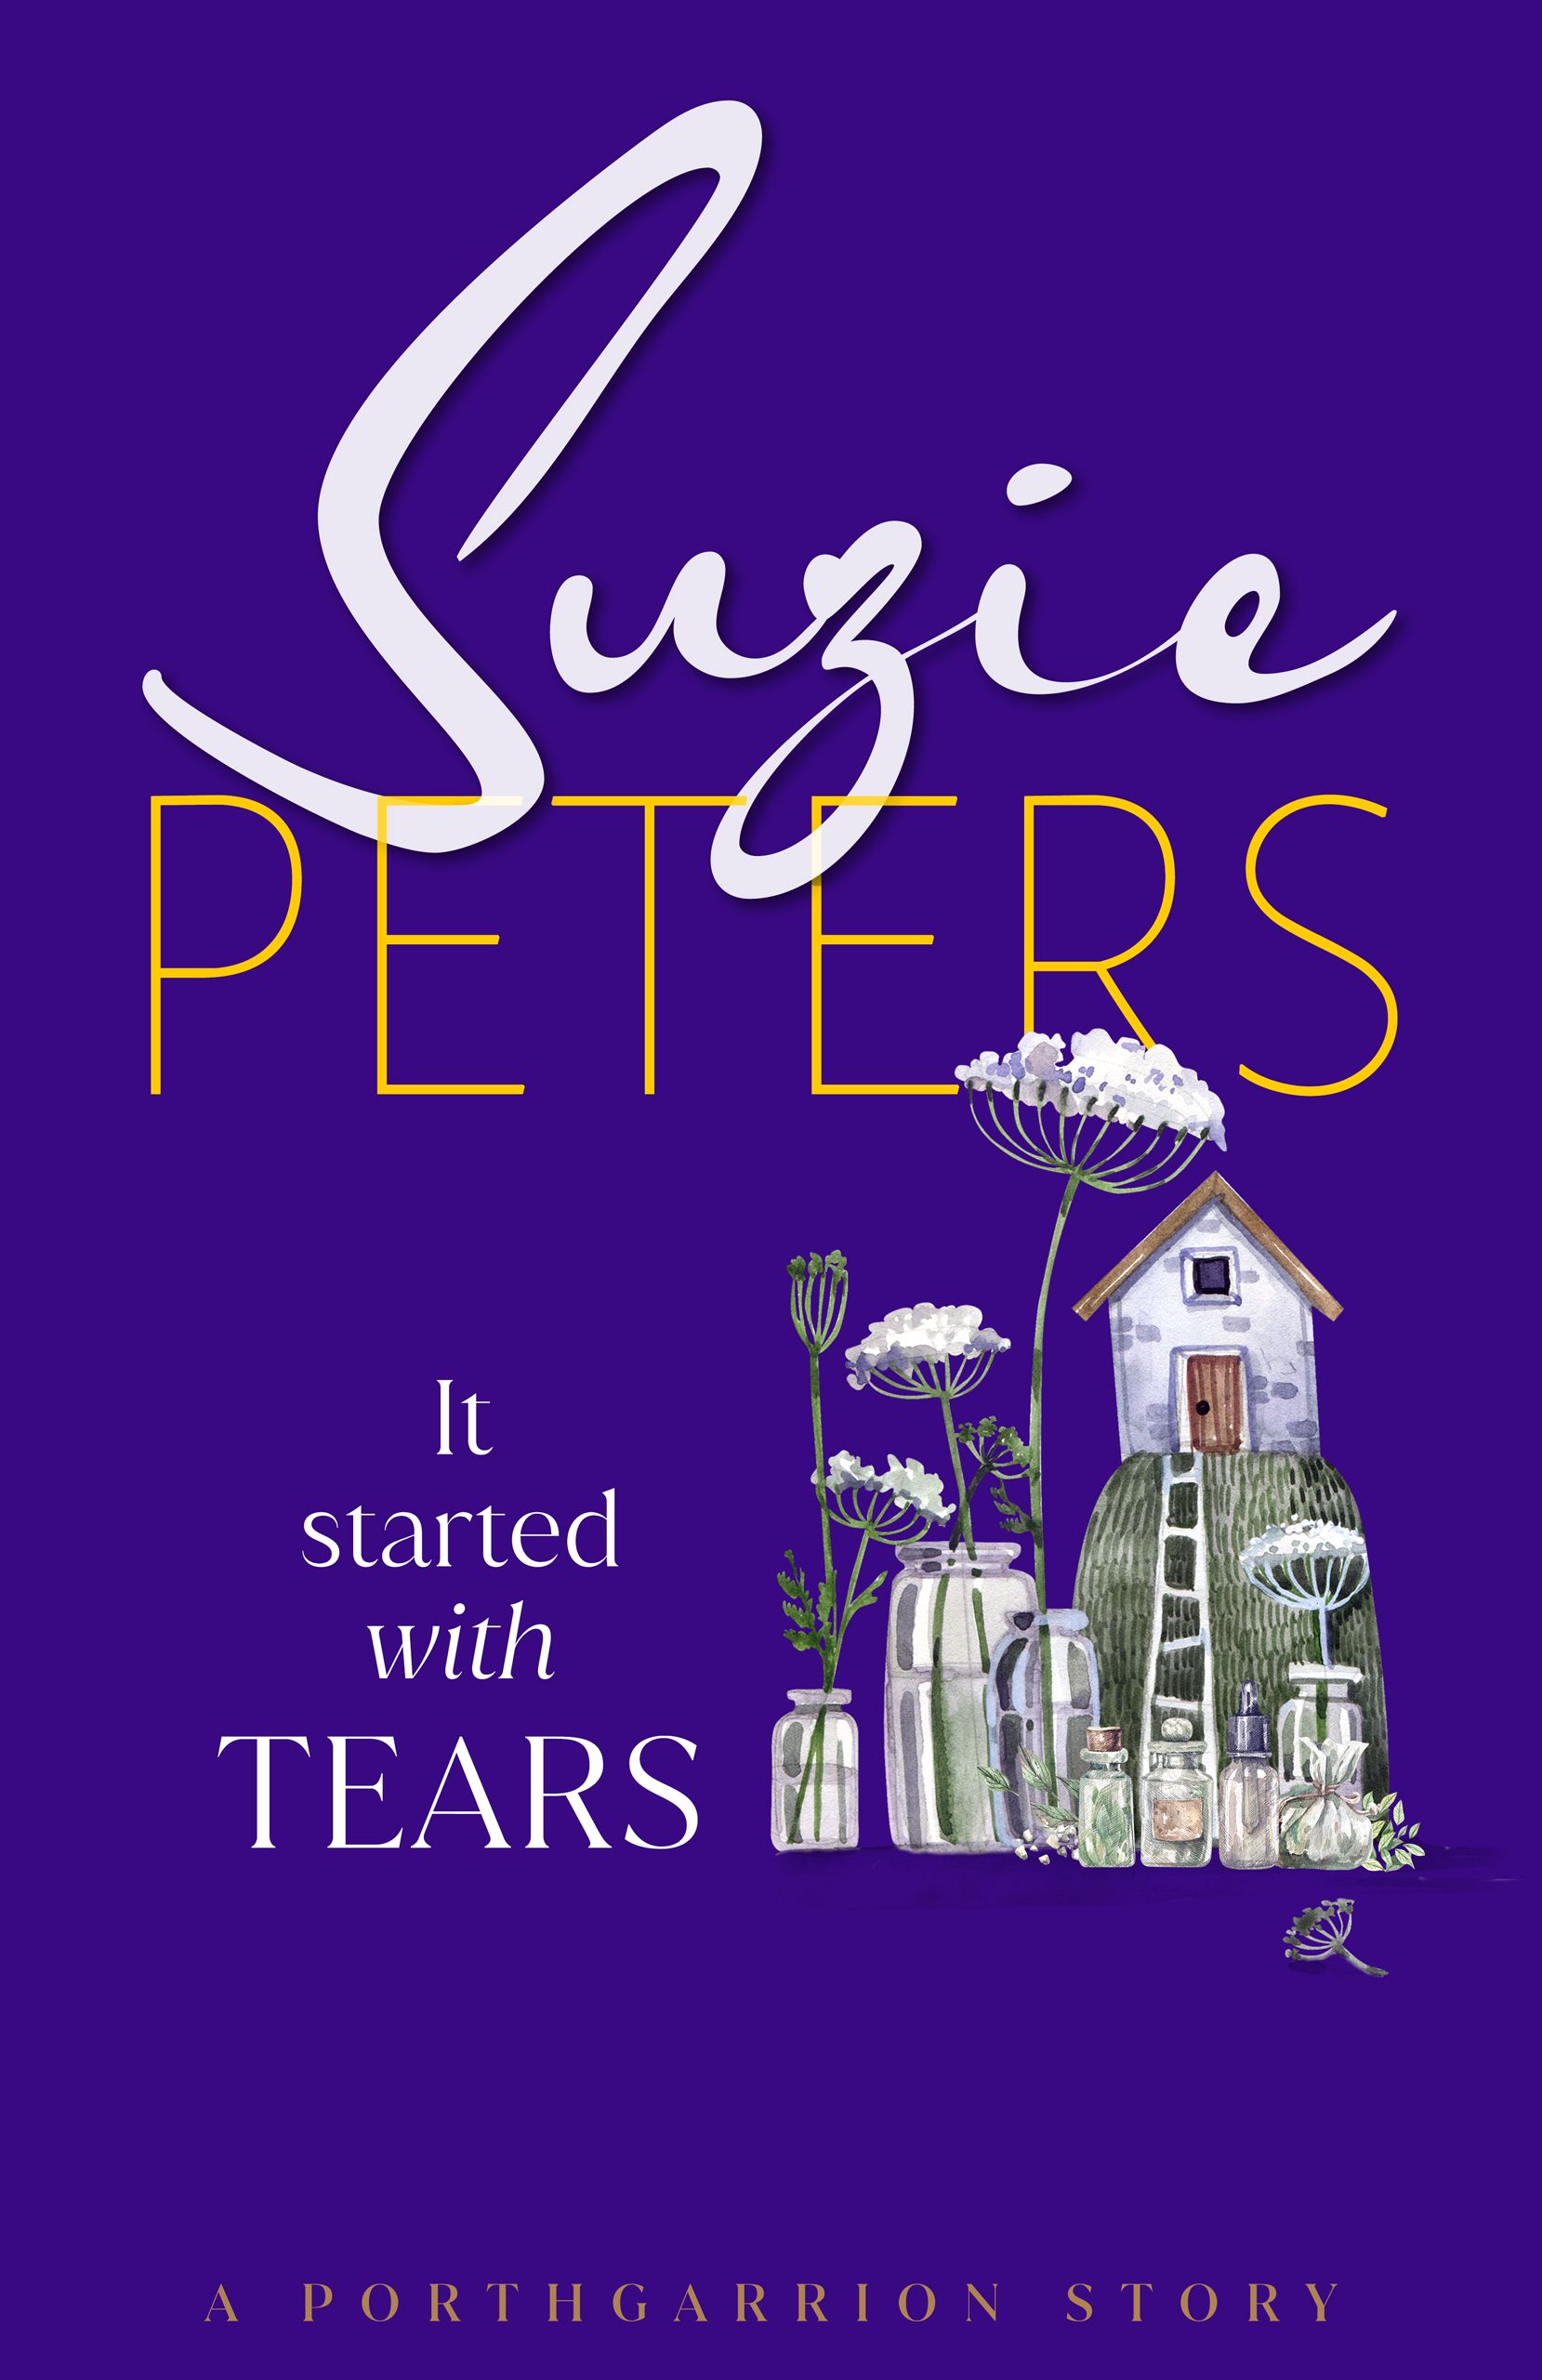 It Started with Tears by Suzie Peters cover graphic.